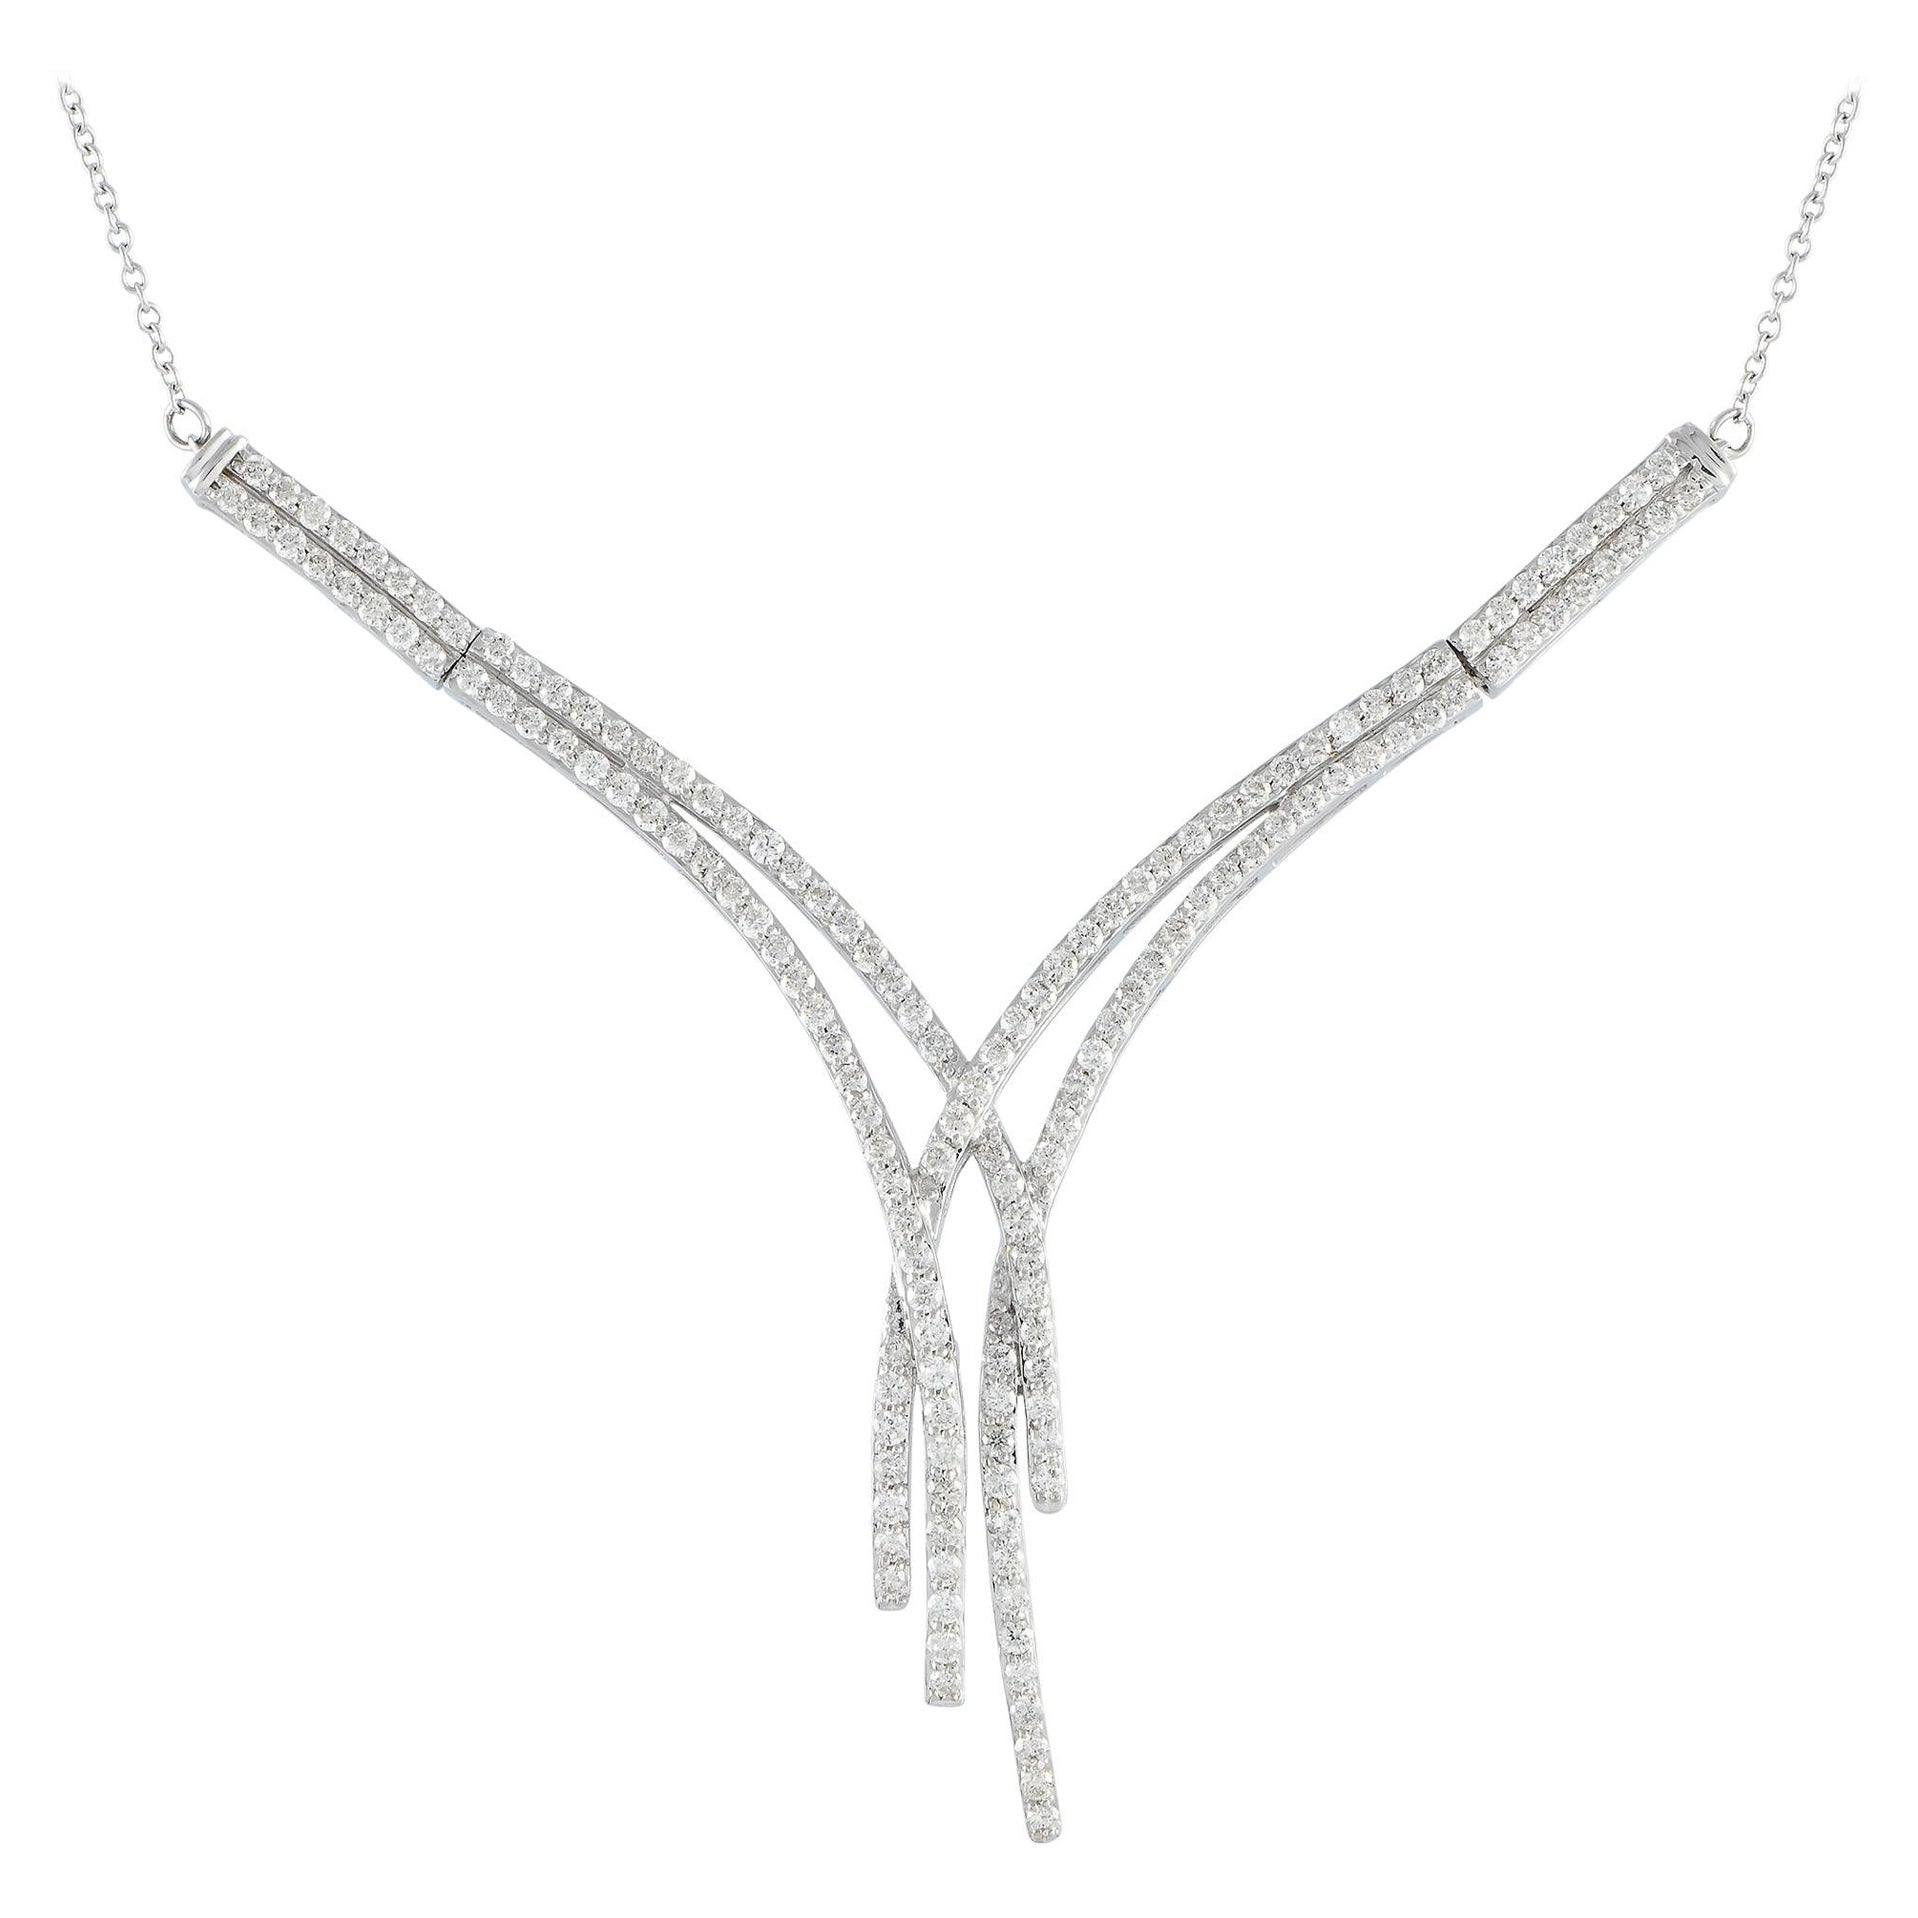 14K White Gold 1.50ct Diamond Necklace NK4-10168W For Sale